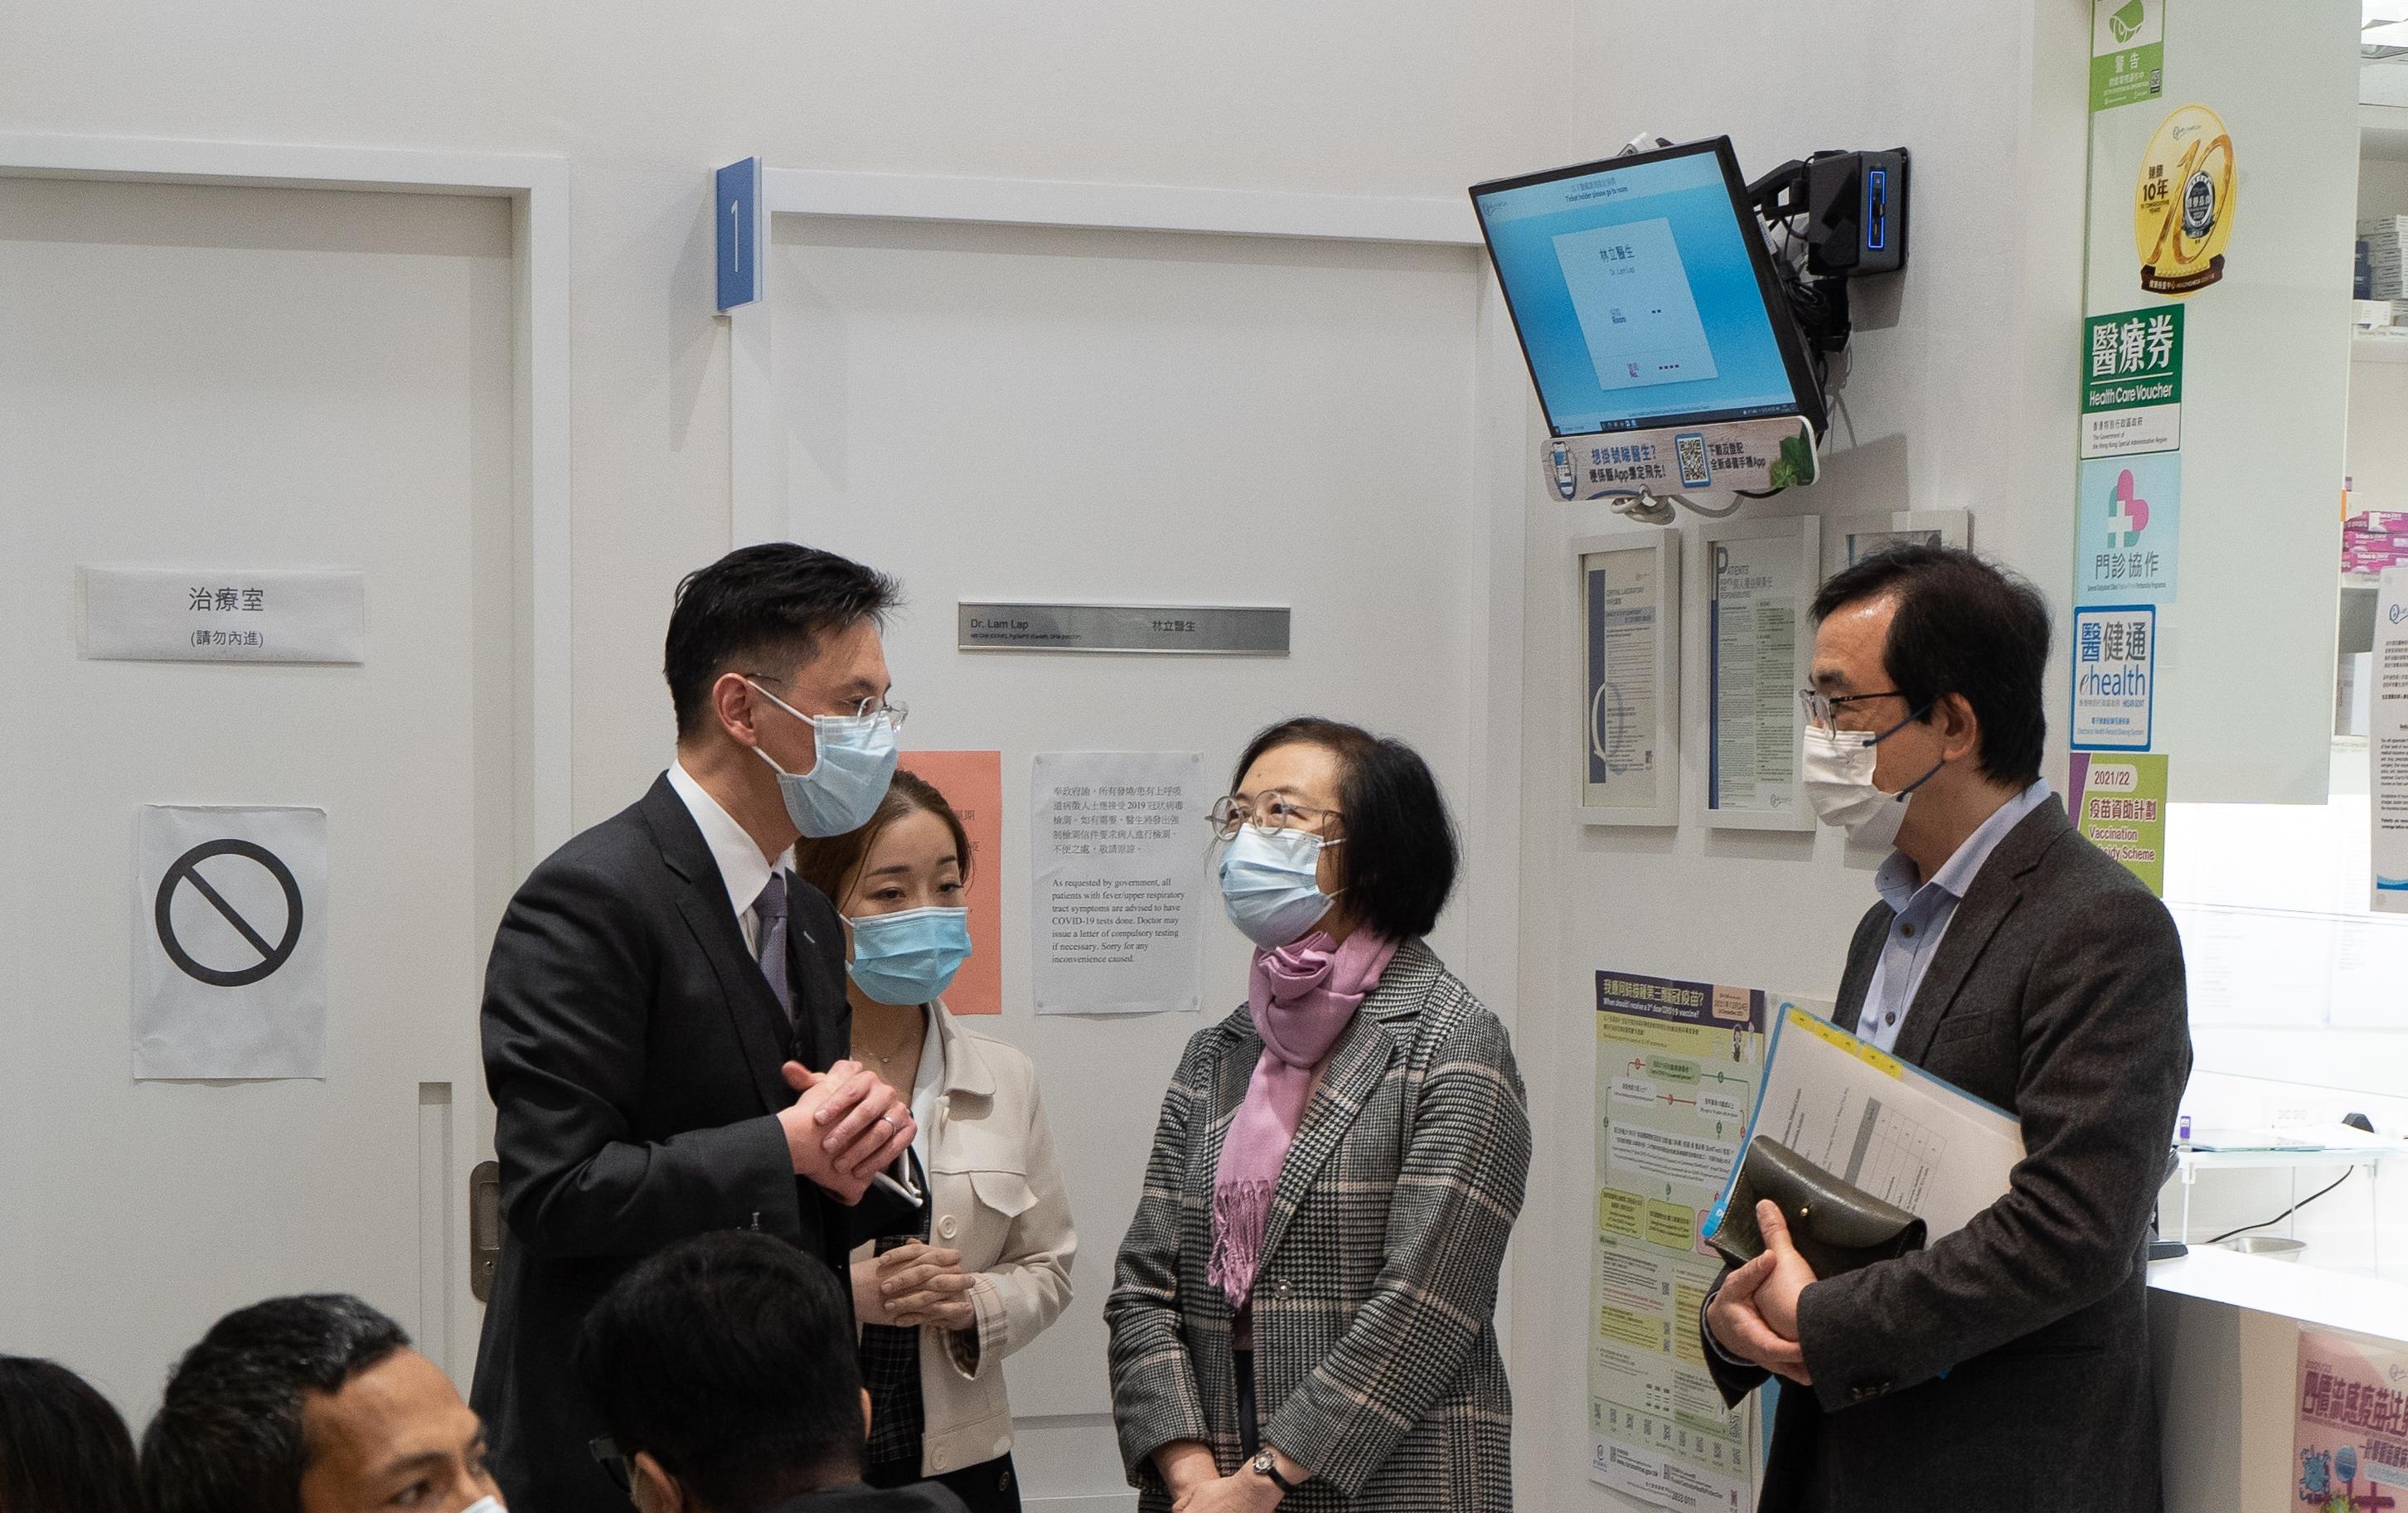 The Secretary for Food and Health, Professor Sophia Chan (second right), inspects a vaccination event organised by a private healthcare institution today (January 27) in Kowloon Bay. Fully funded by the Government, the District Health Centres (DHCs) and DHC Expresses had actively assisted members of the public in need to make appointments for the event.